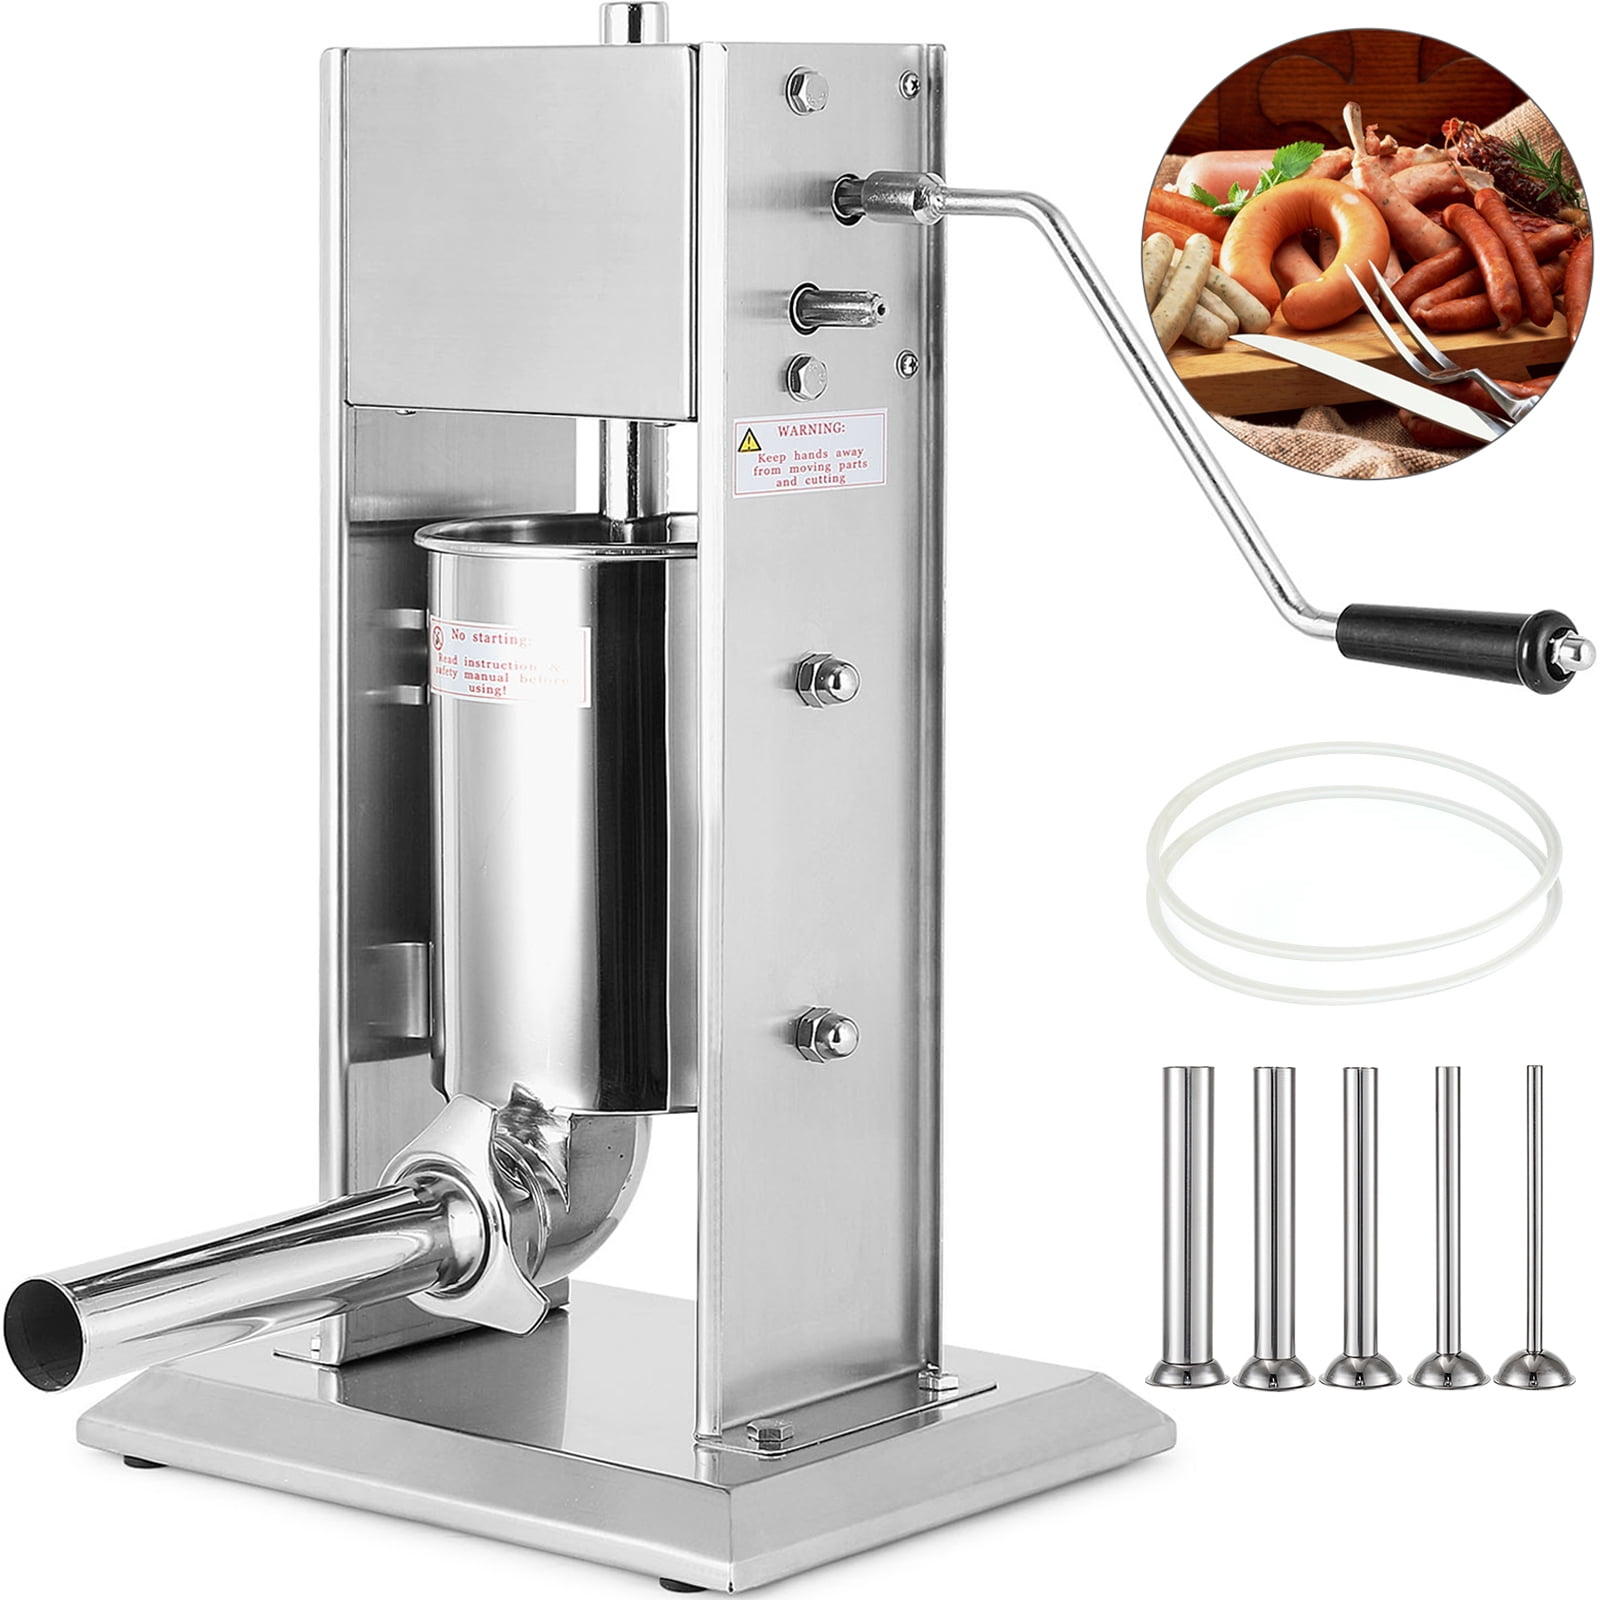 Sausage Stuffer Vertical Kitchen Machine Meat Stuffing Maker Kit with 5 Size Professional Filling Nozzles Attachment 3L Commercial and Household Use 